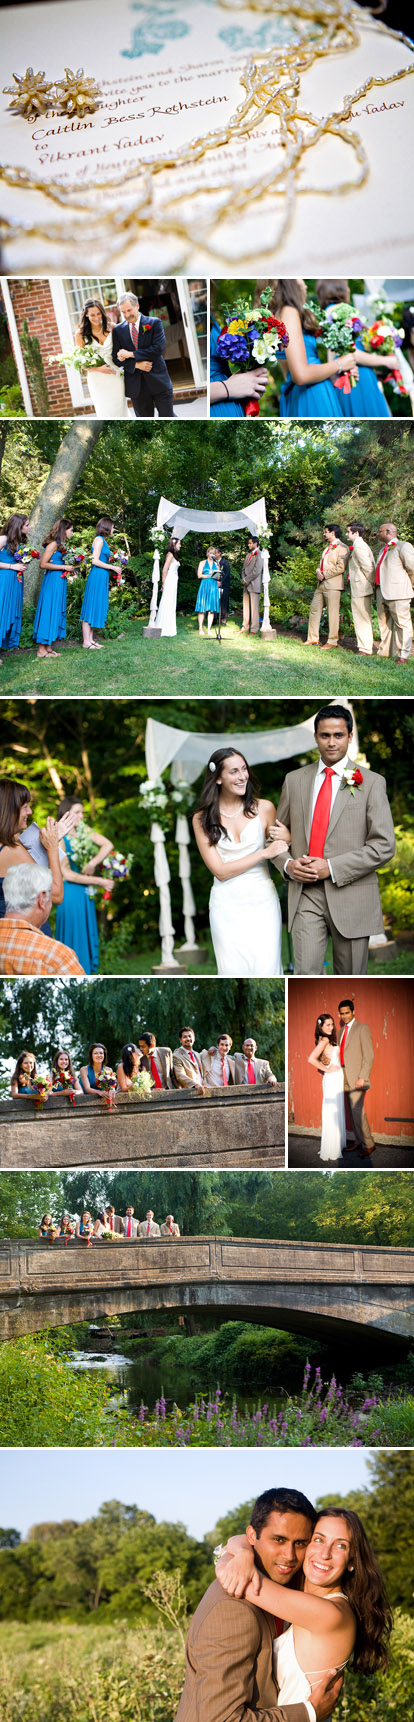 Summer backyard family wedding in Pennsylvania, red, teal and peacock blue wedding color palette, images by Jihan Abdalla